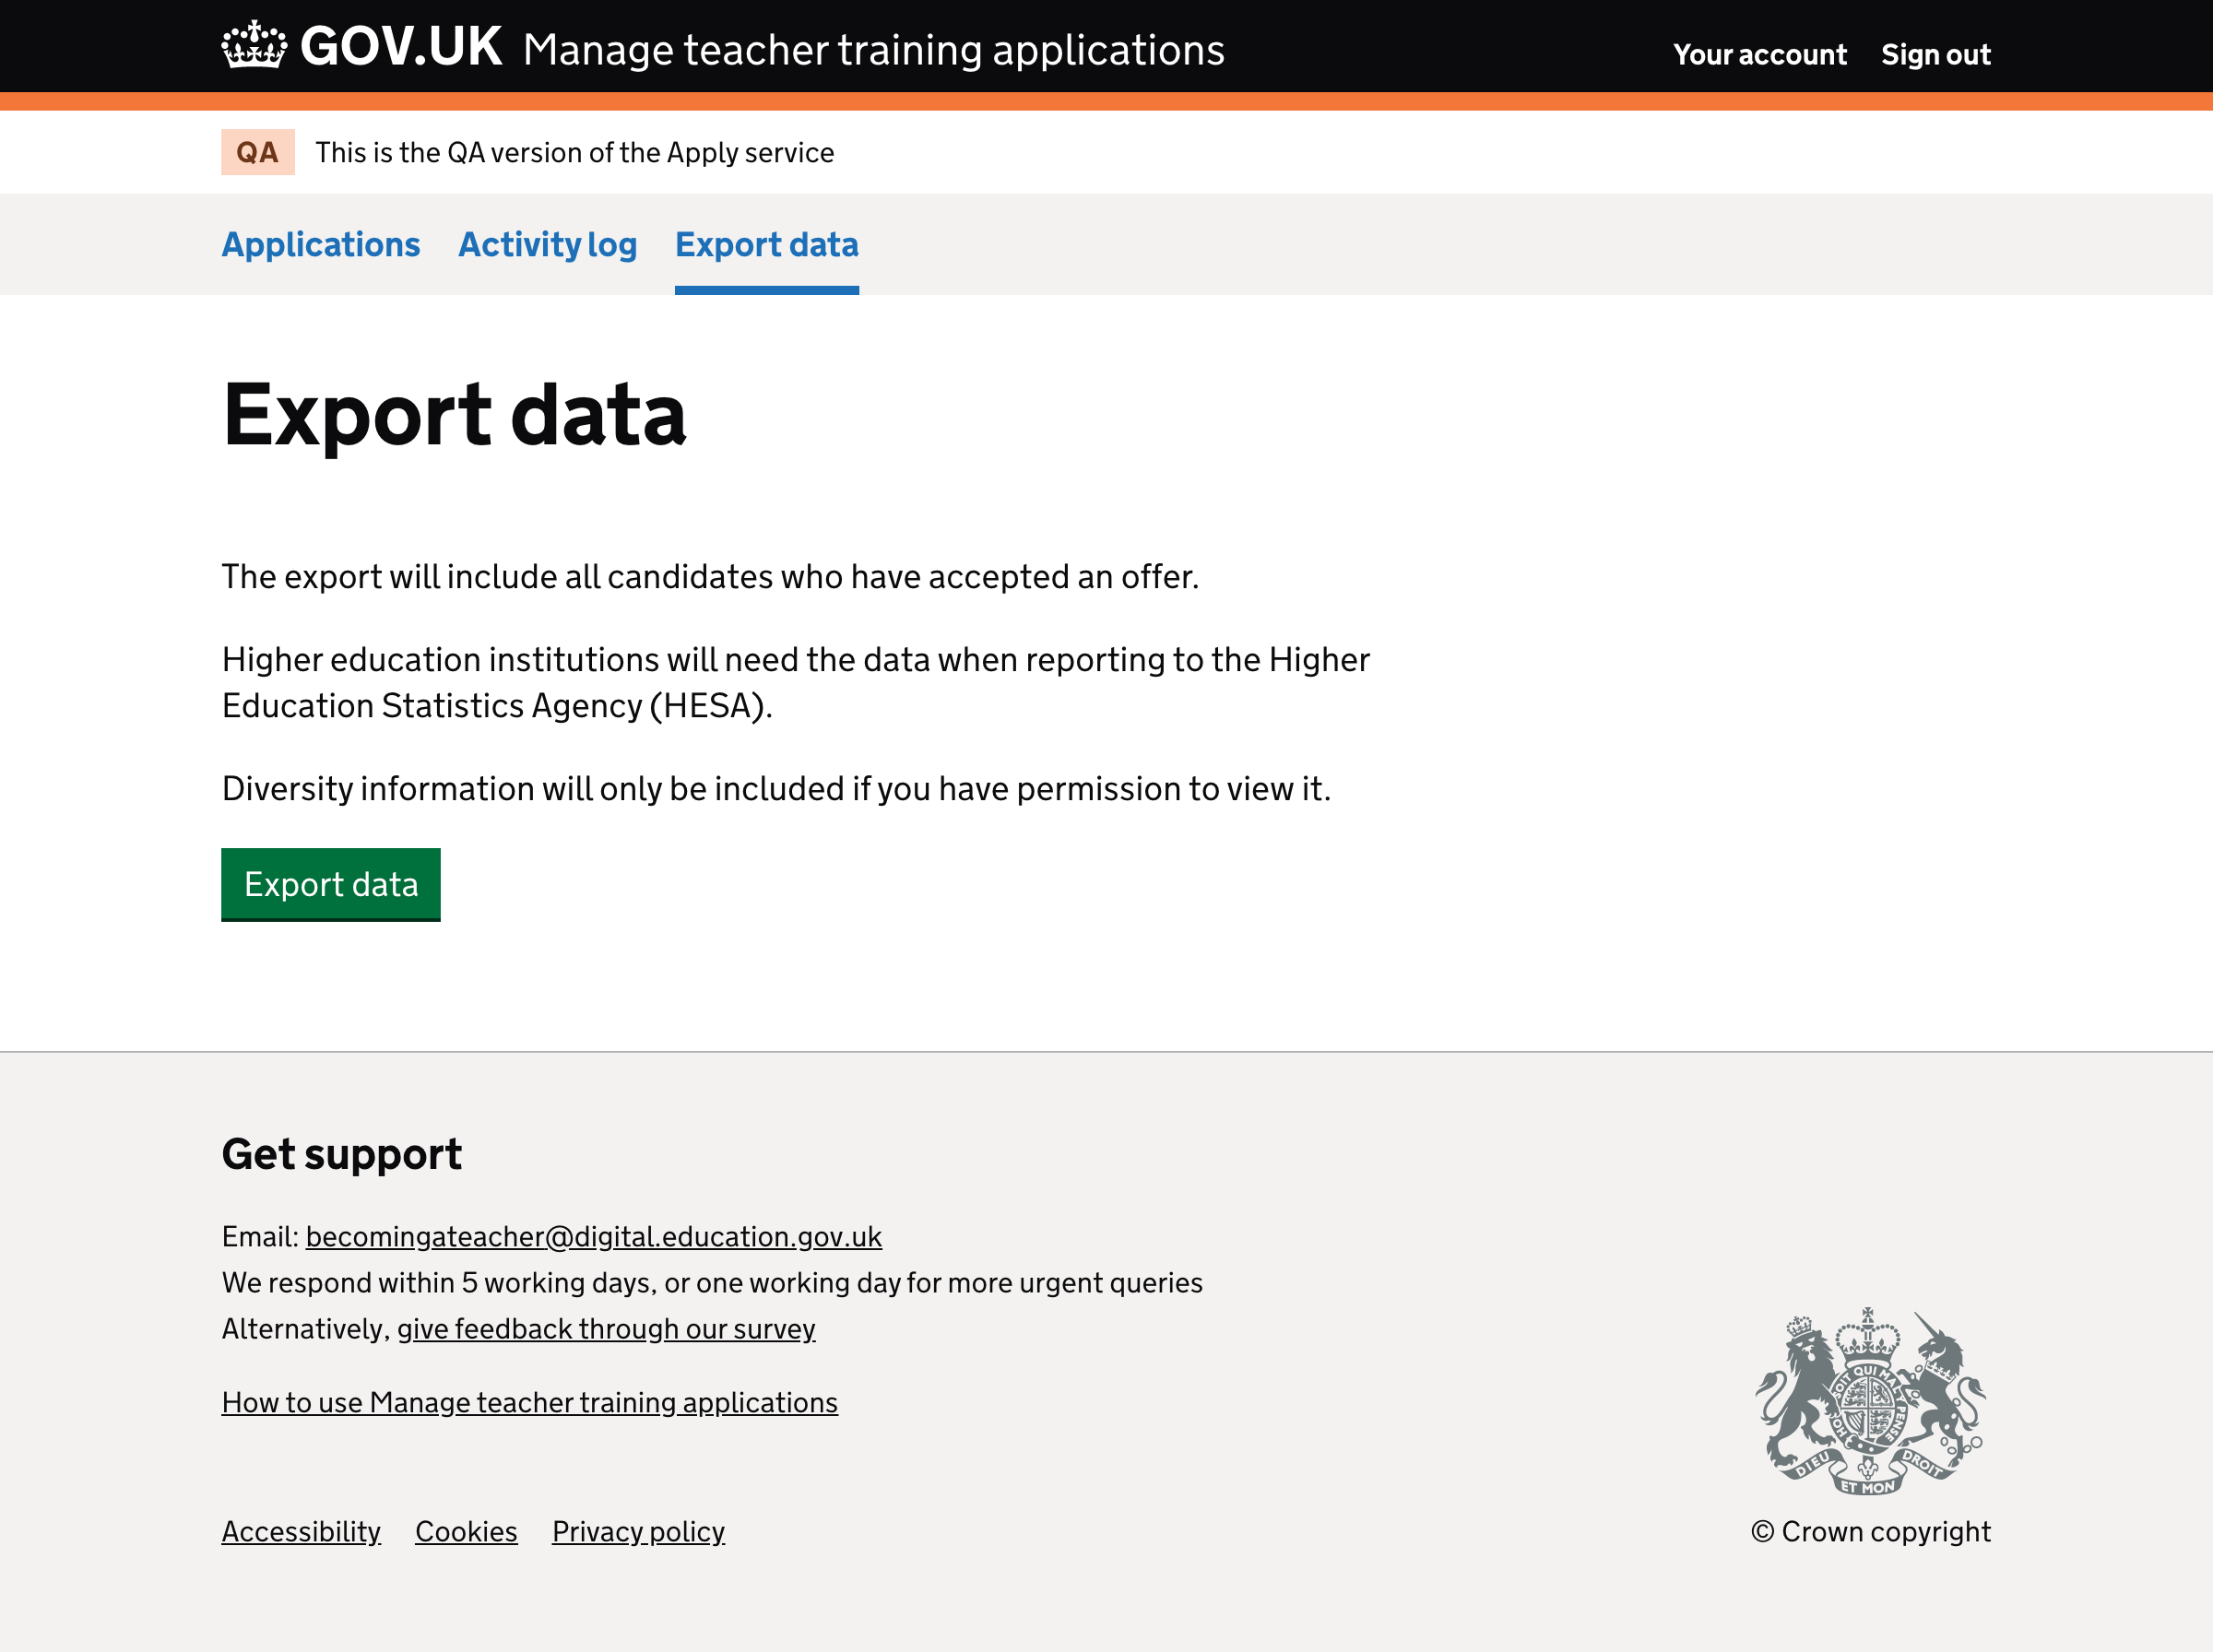 Screenhost of export page for HESA data.